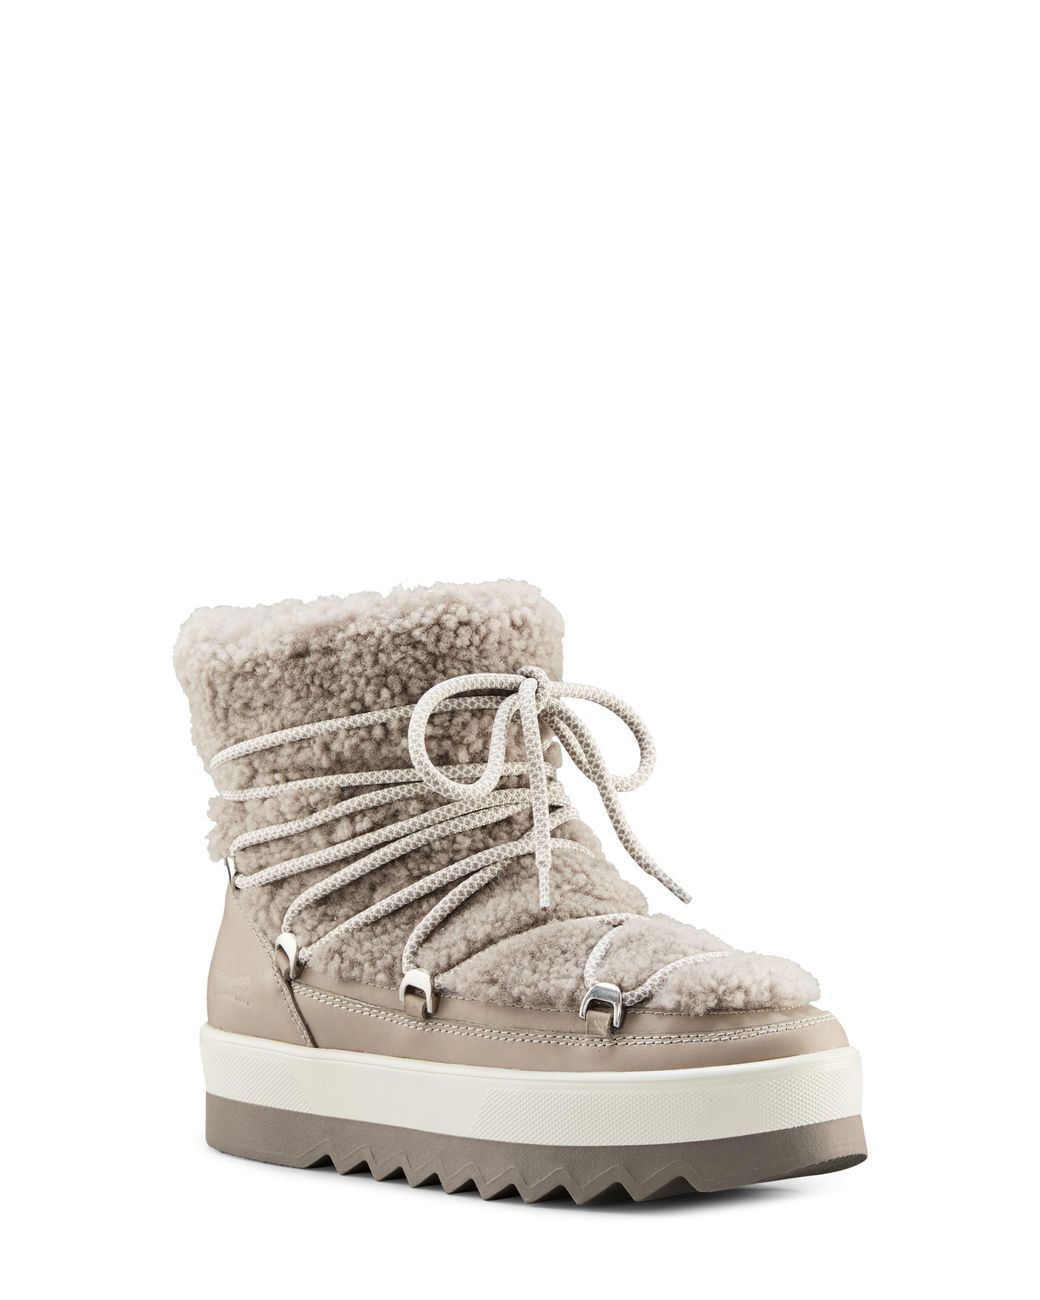 Cougar Shoes Verity Genuine Shearling Waterproof Boot in White | Lyst